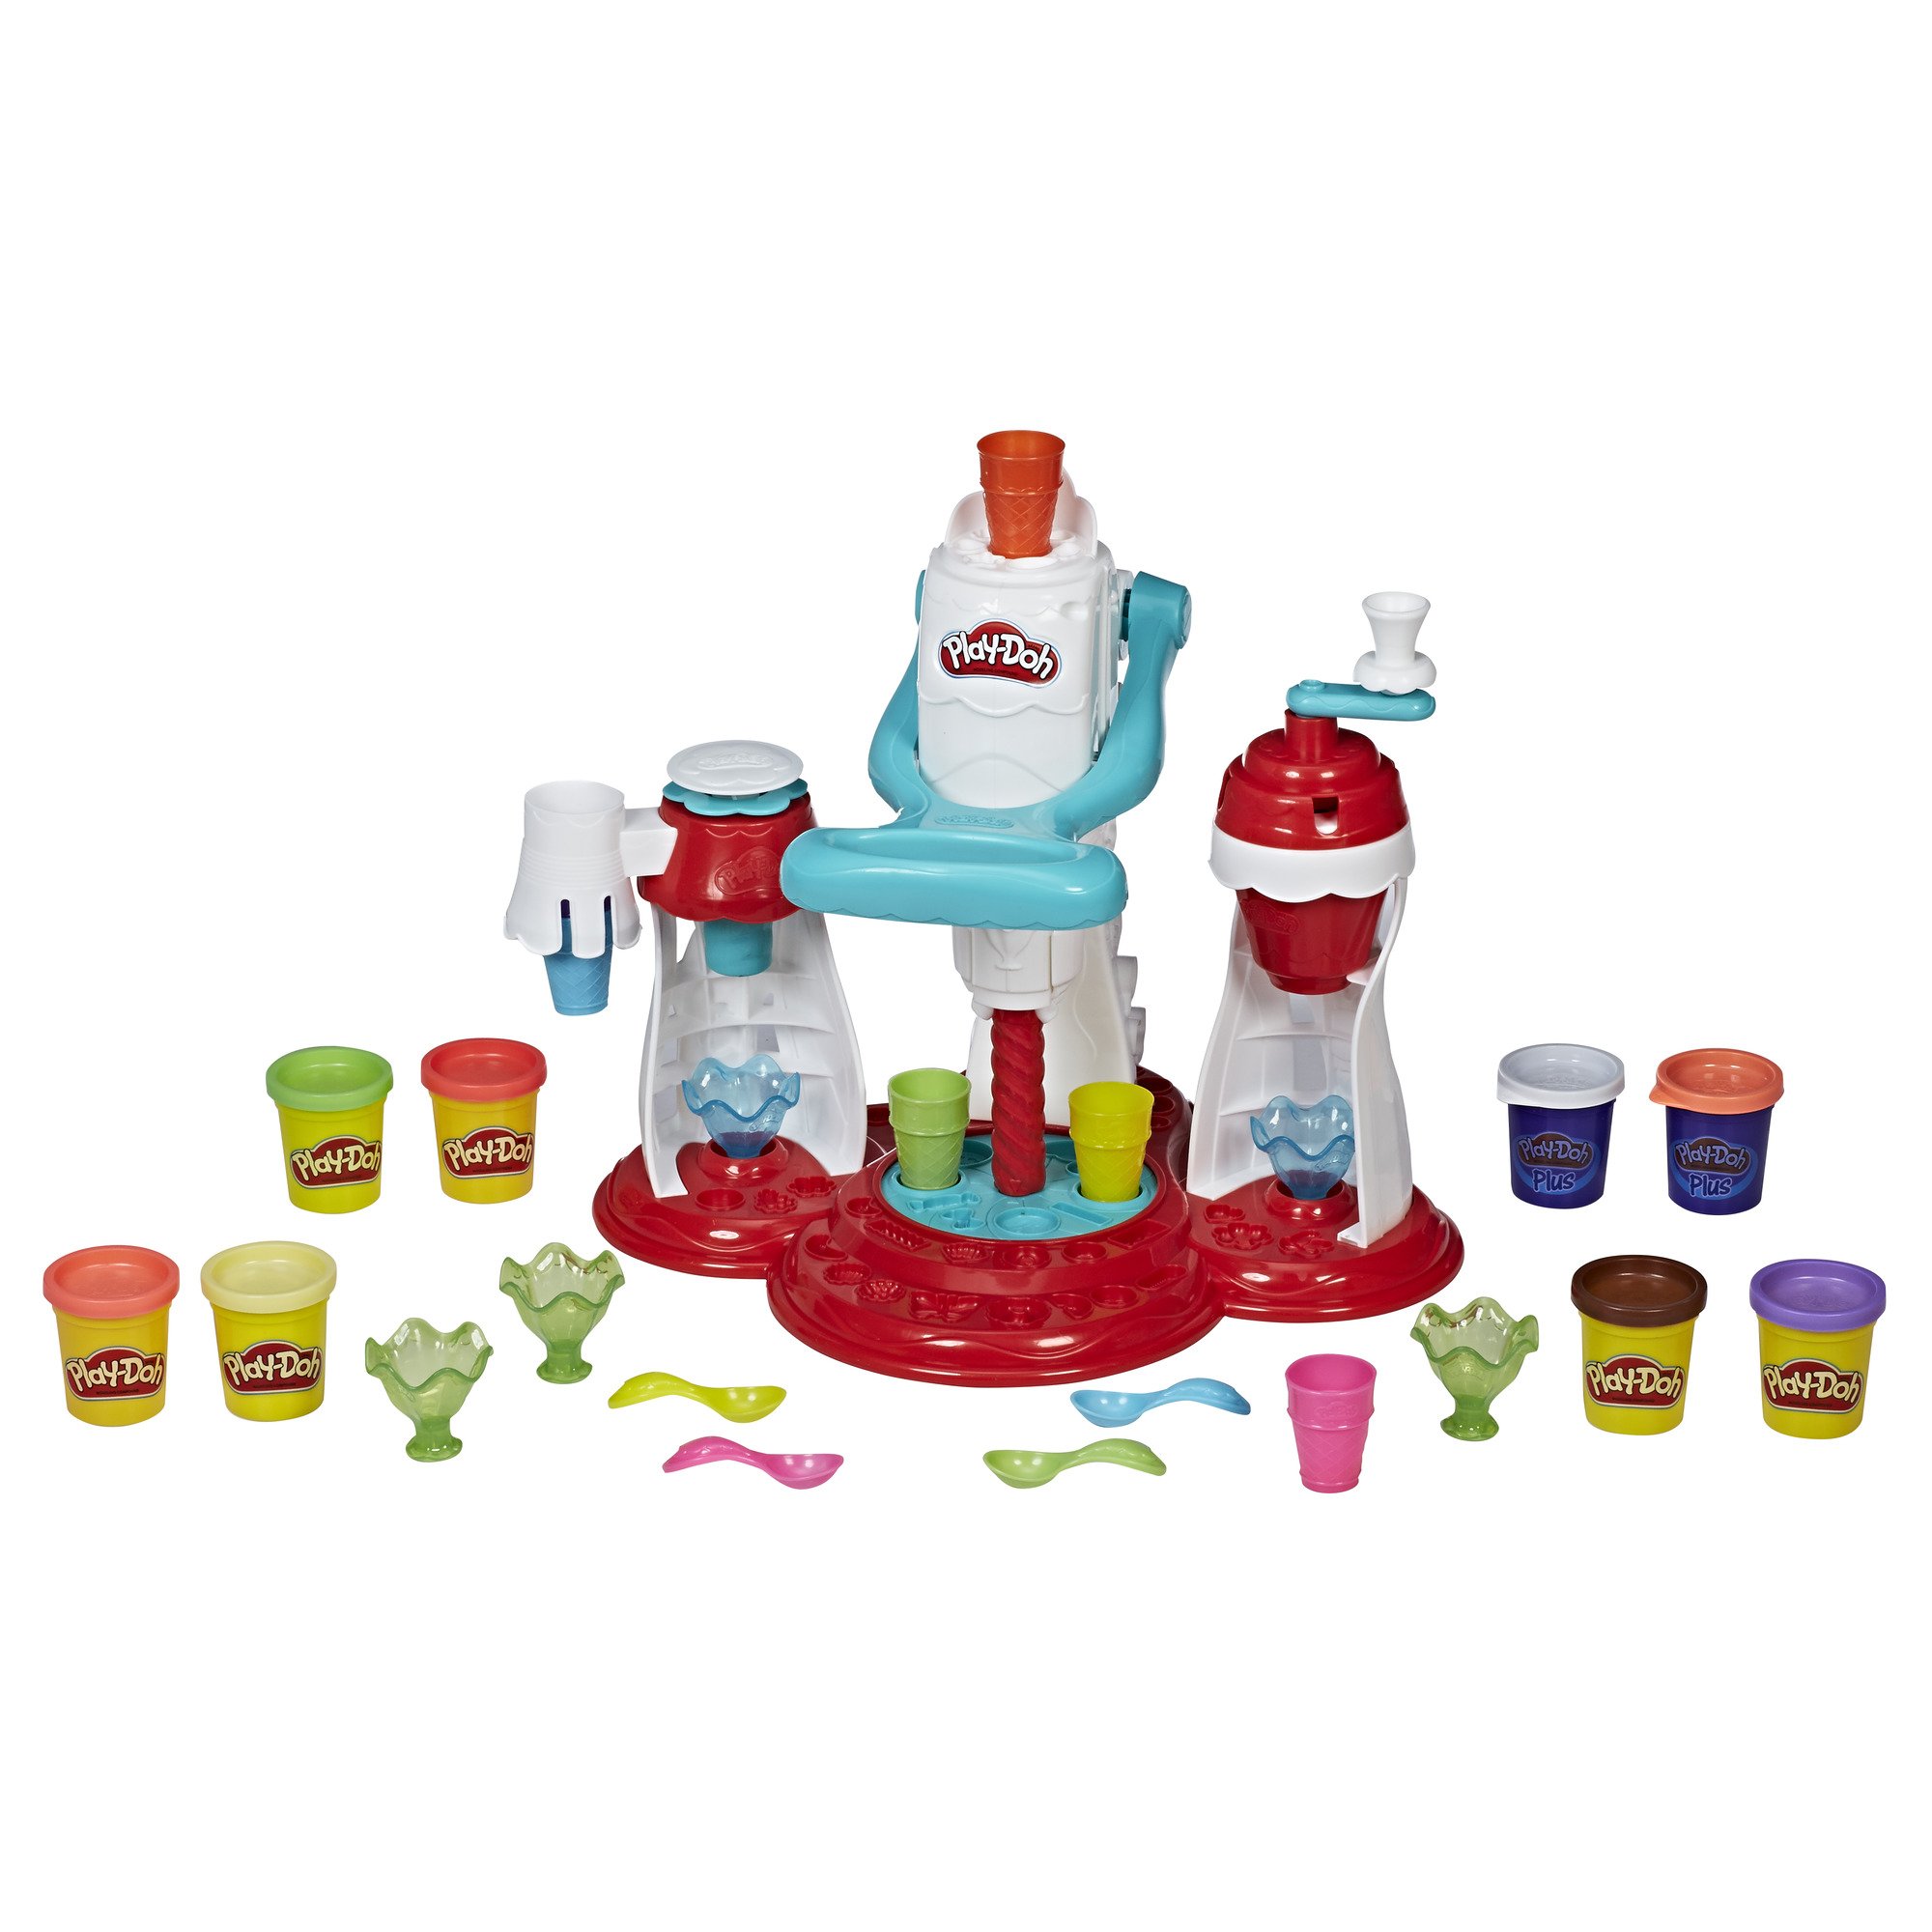 Play-Doh Kitchen Creations Ultimate Swirl Ice Cream Maker Food Set with 8 Cans of Play-Doh - image 1 of 8